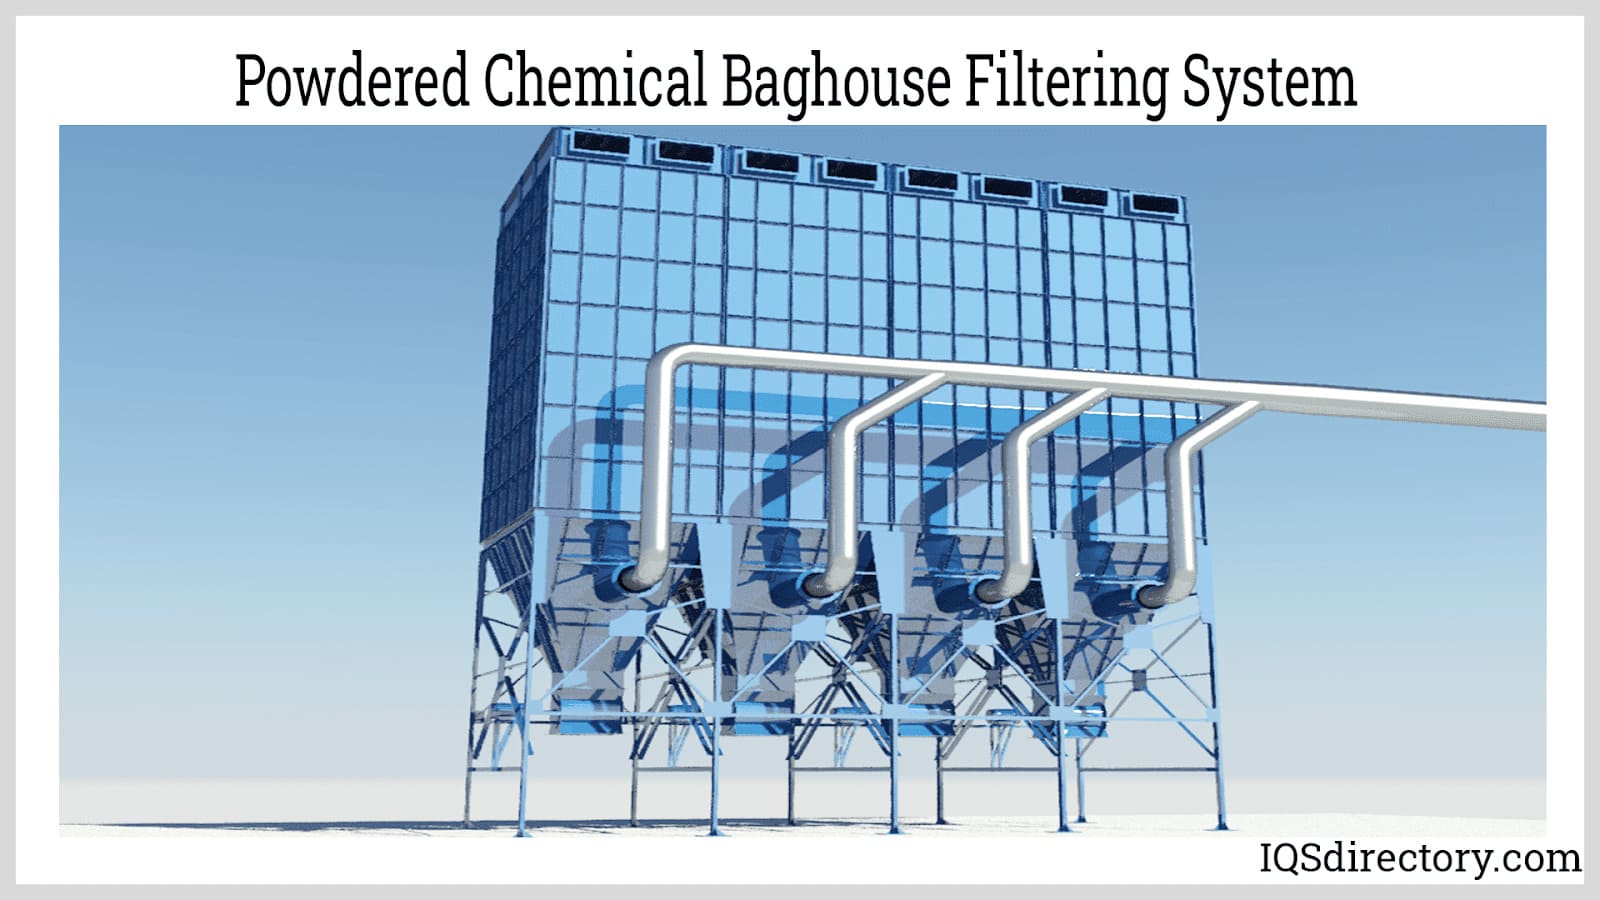 Powdered Chemical Baghouse Filtering System